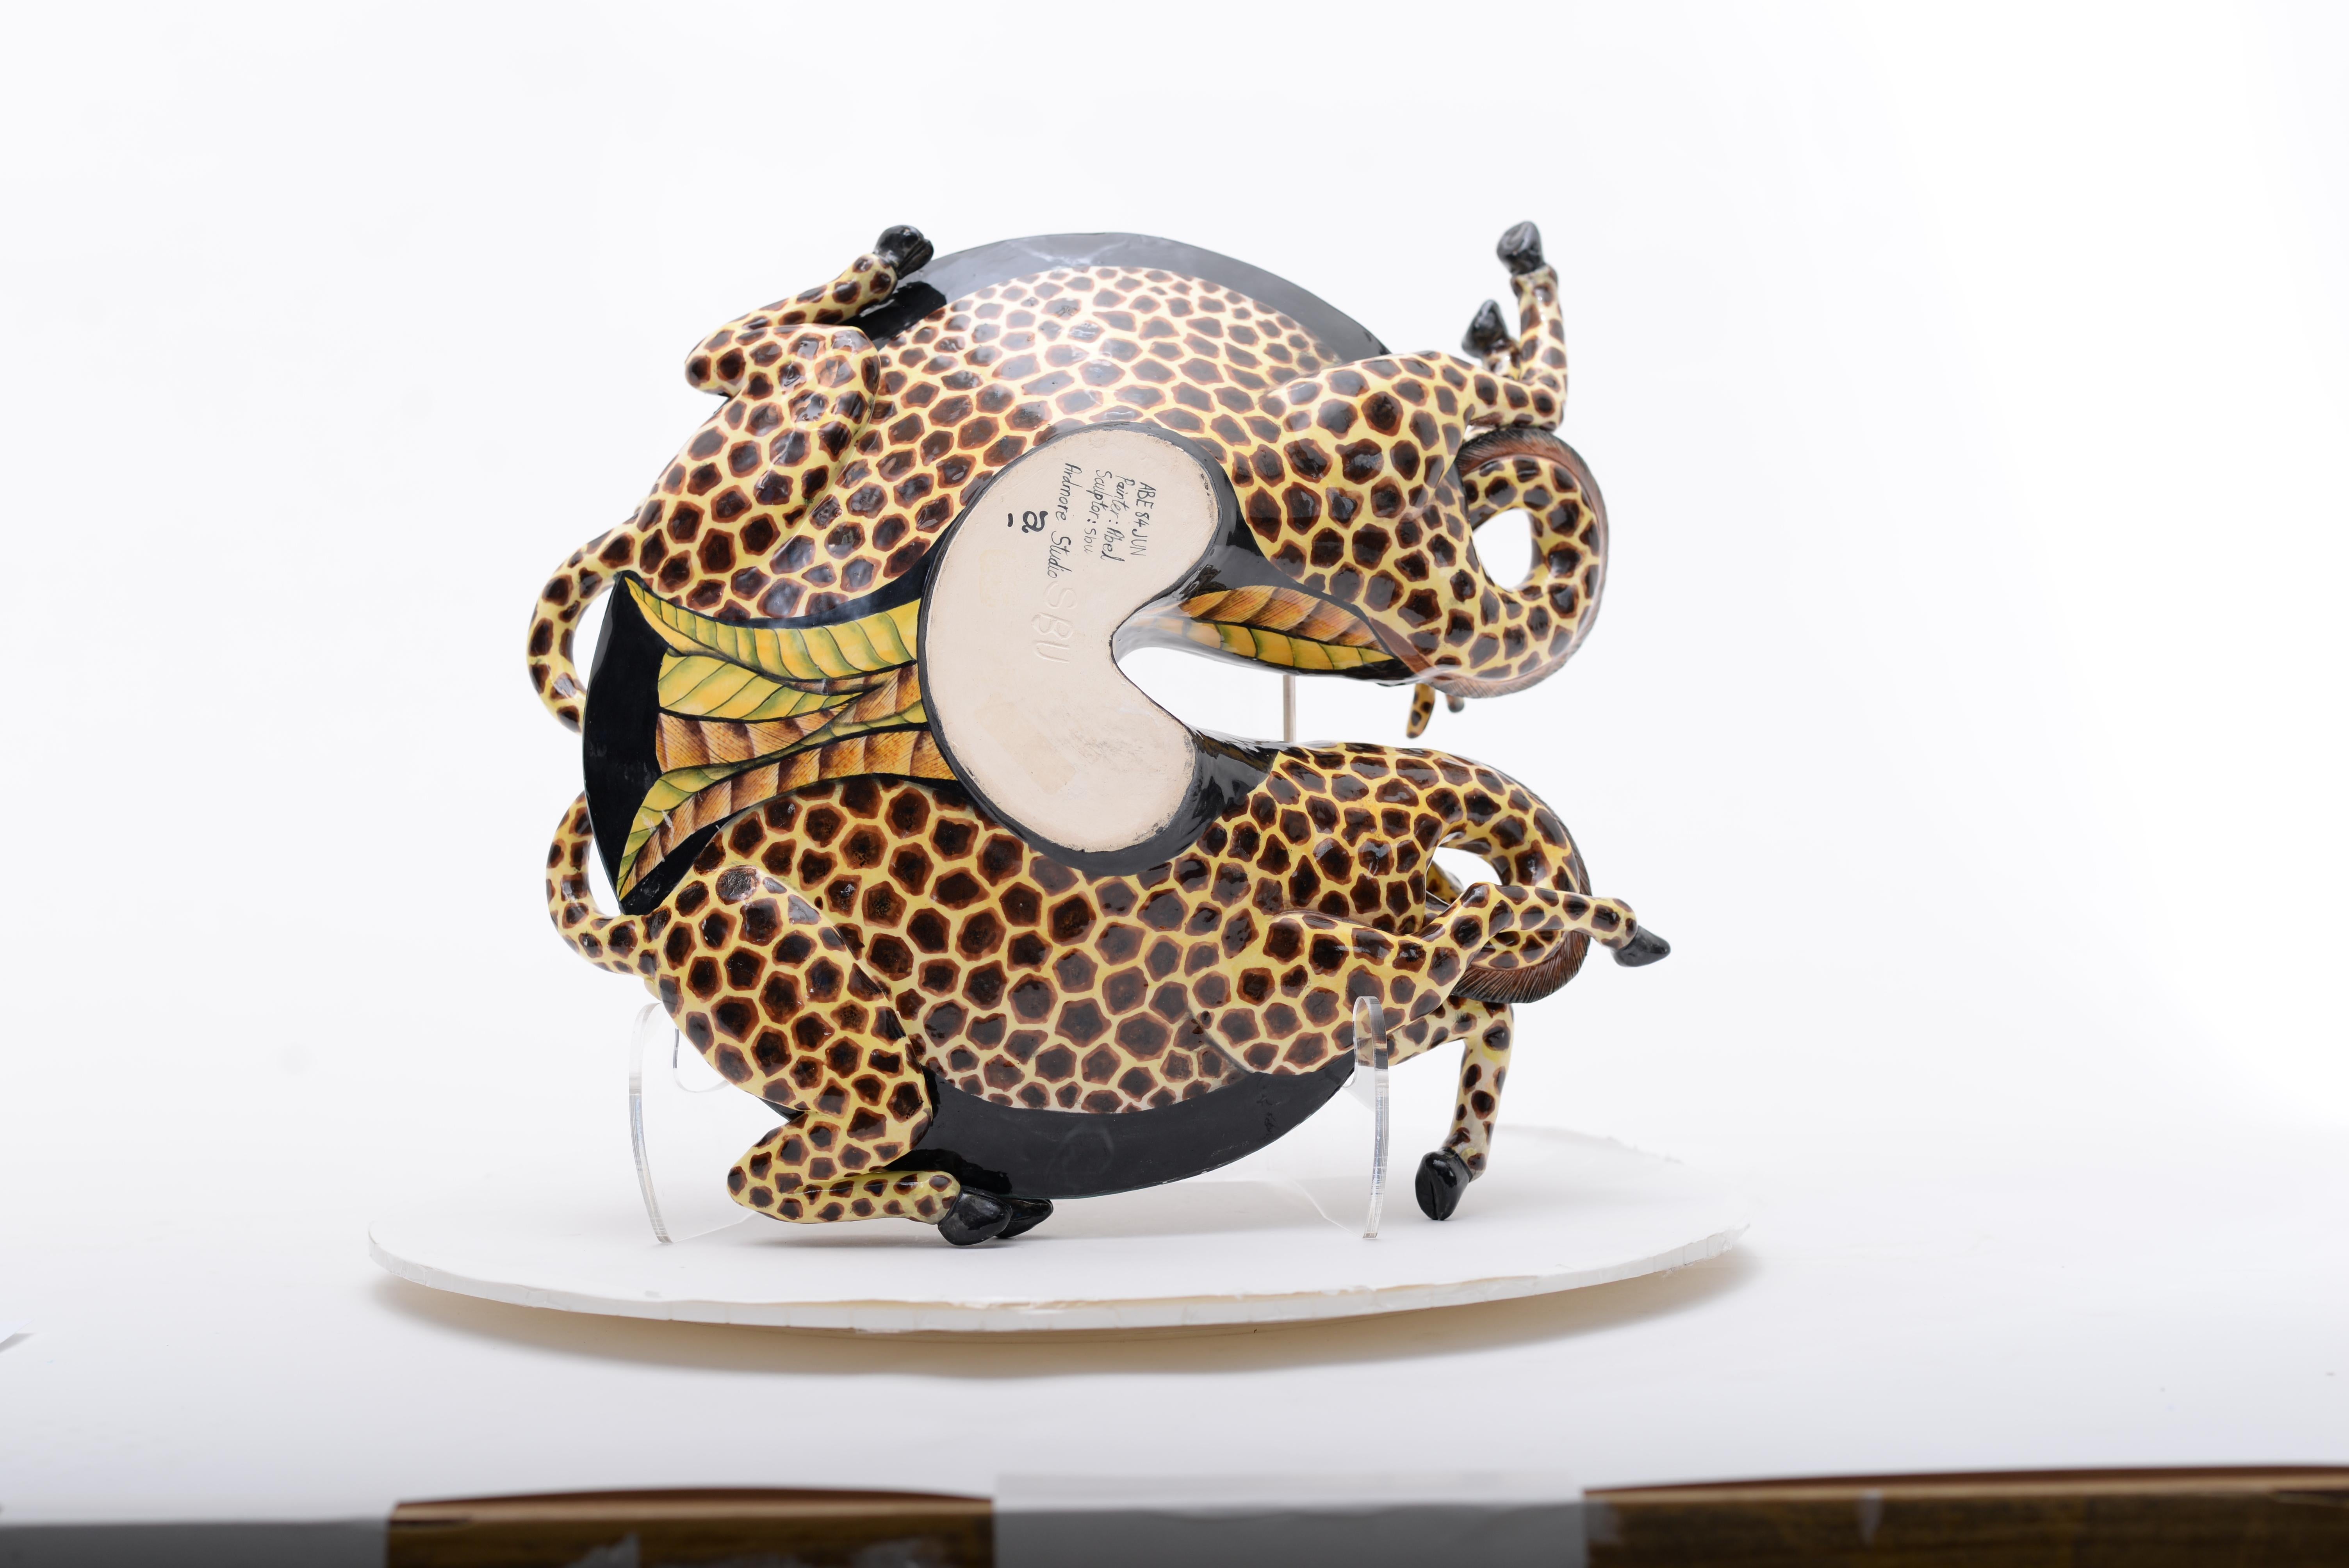 The Giraffe Bowl from Ardmore Ceramics, a masterpiece crafted in South Africa. Standing 7 inches tall, 15 inches long, and 16 inches wide, this ceramic art piece is a testament to the skill of Sbusiso Ndaba and Abel Mohlakoana. Each detail, from the